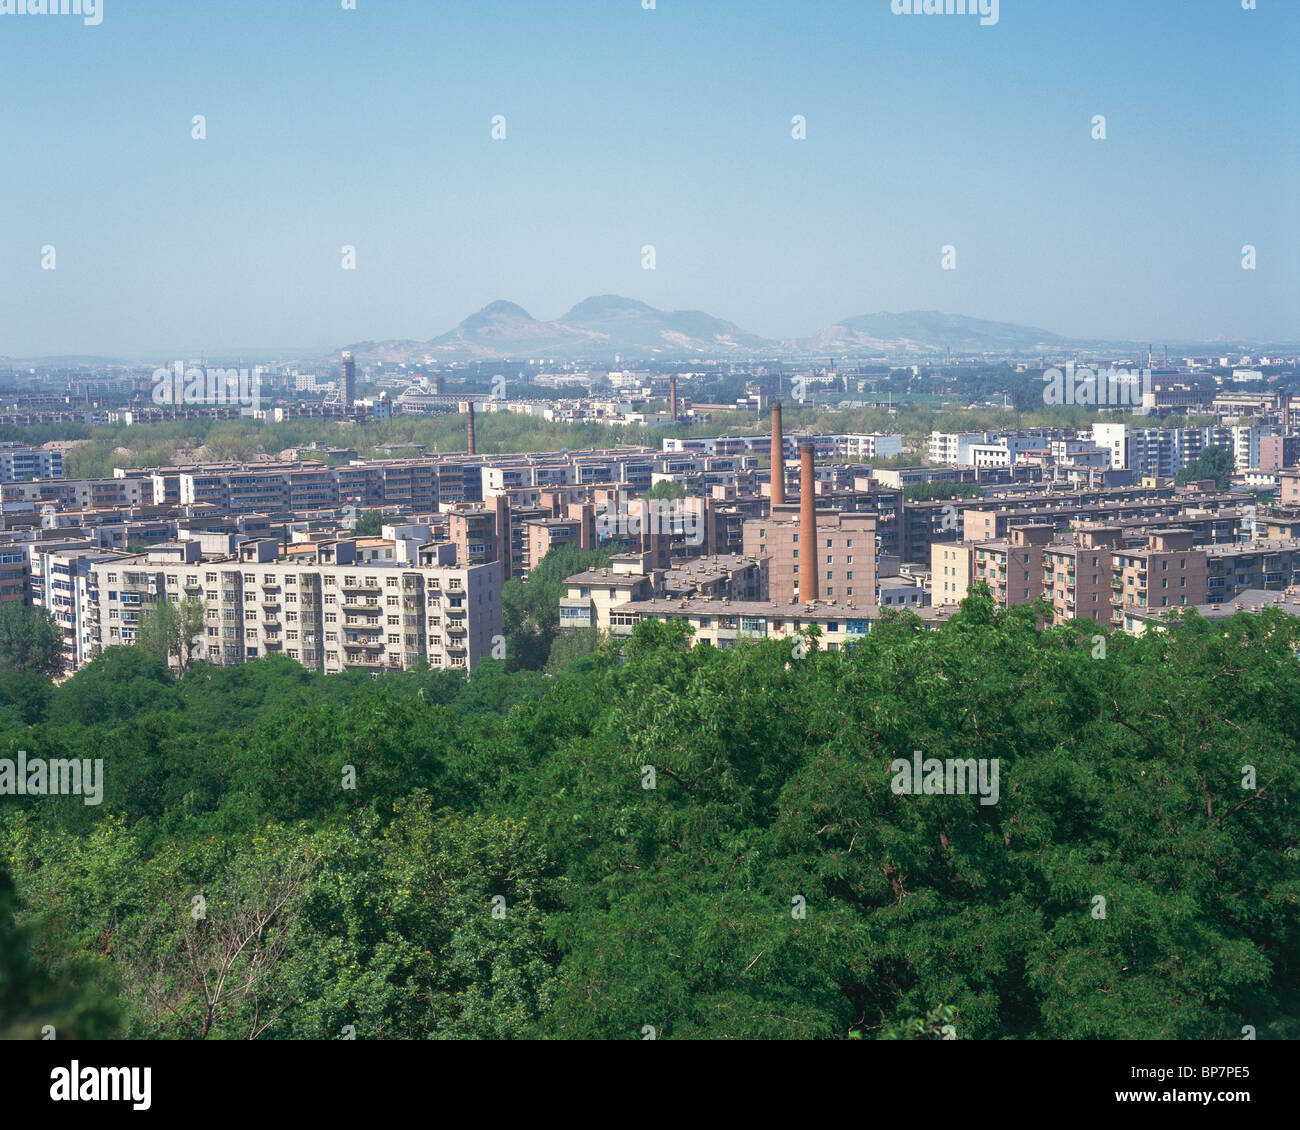 An Iron Ore Industrial Complex, Liaoning Province, China Stock Photo